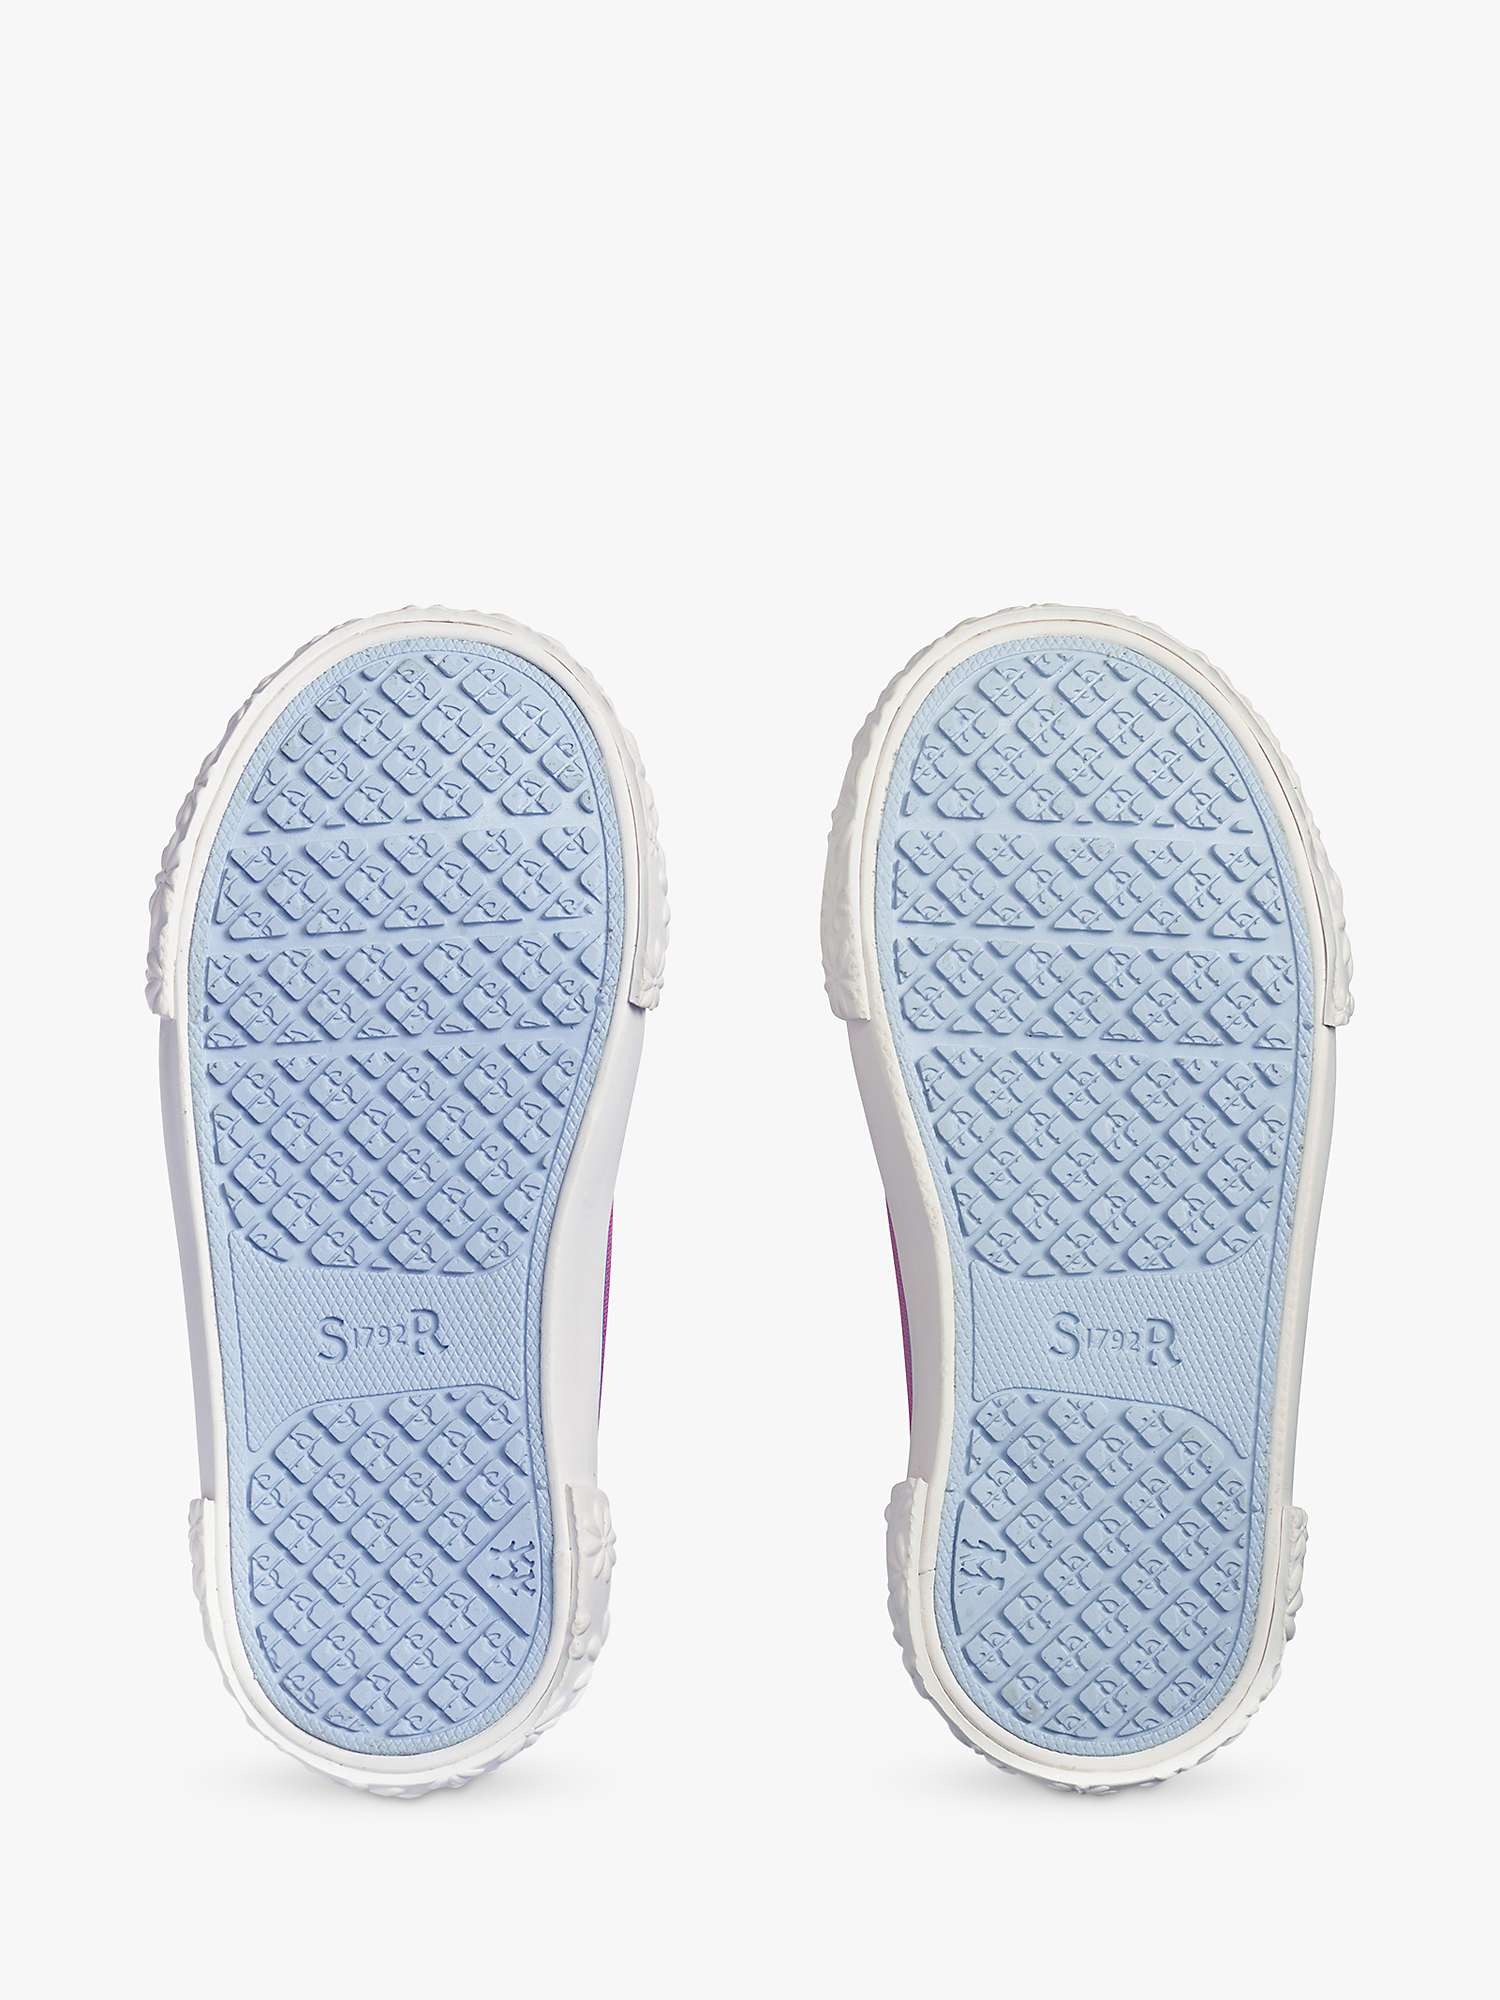 Buy Start-Rite’s Kids' Anchor Canvas Shoes Online at johnlewis.com